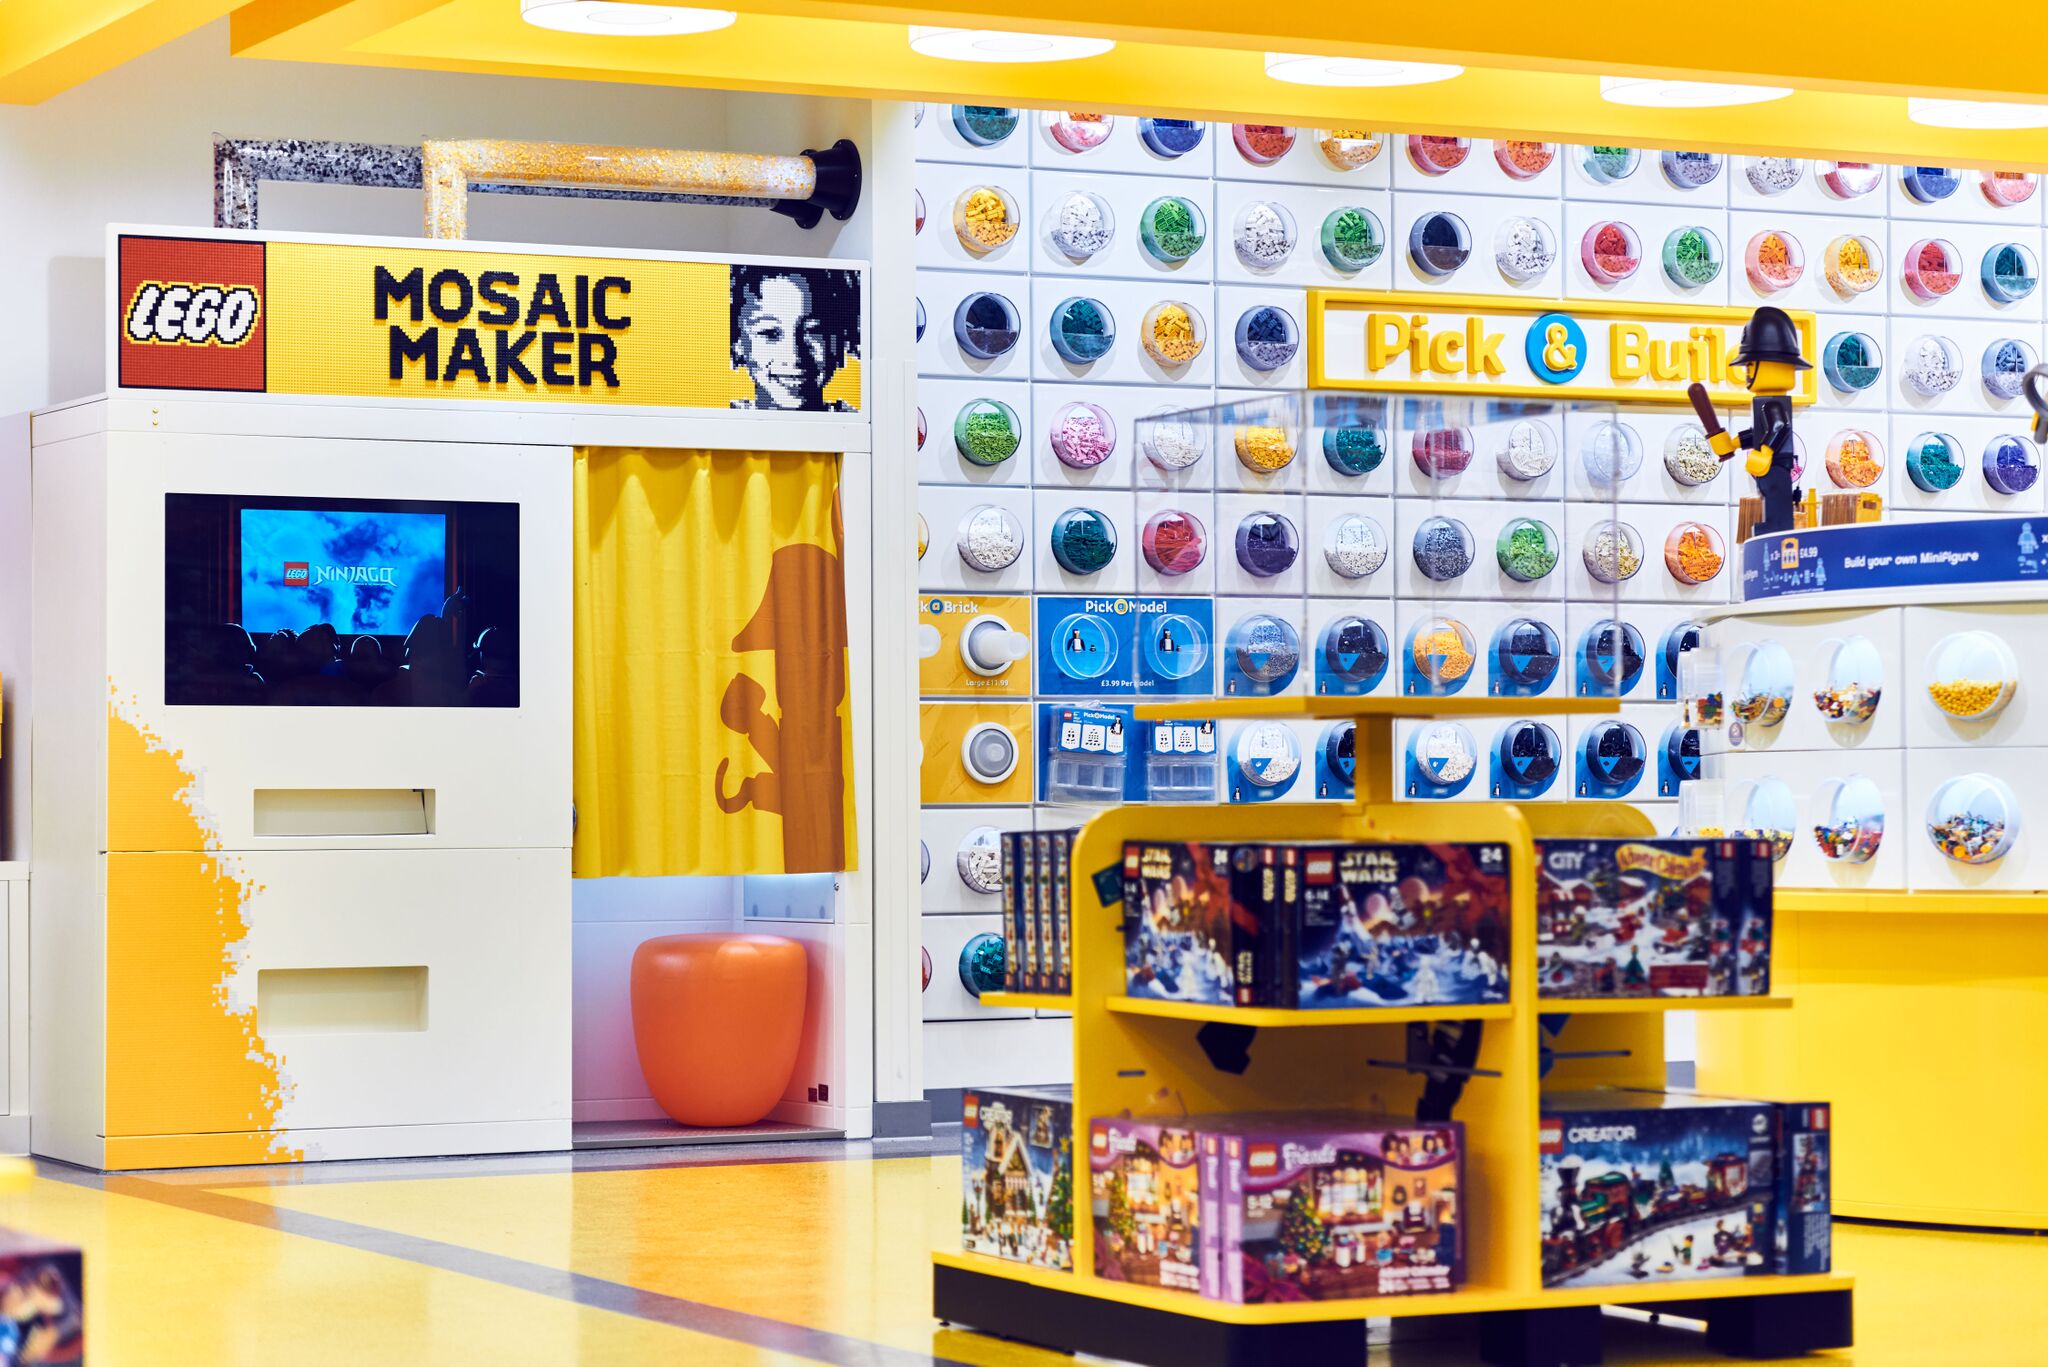 World's largest LEGO store opens in London's Leicester Square